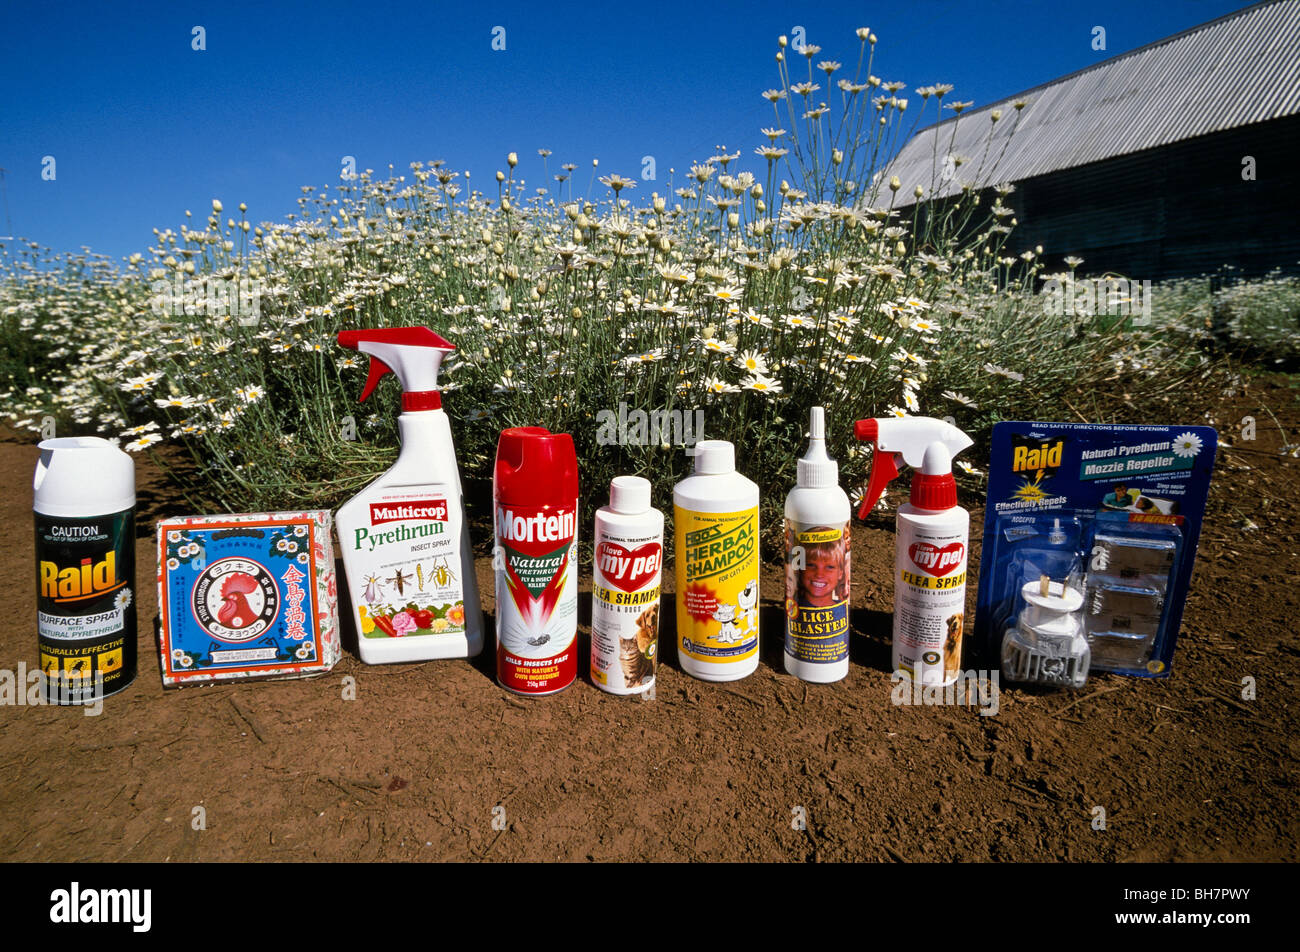 Pyrethrum-based insecticidal products with flowering pyrethrum, Australia Stock Photo